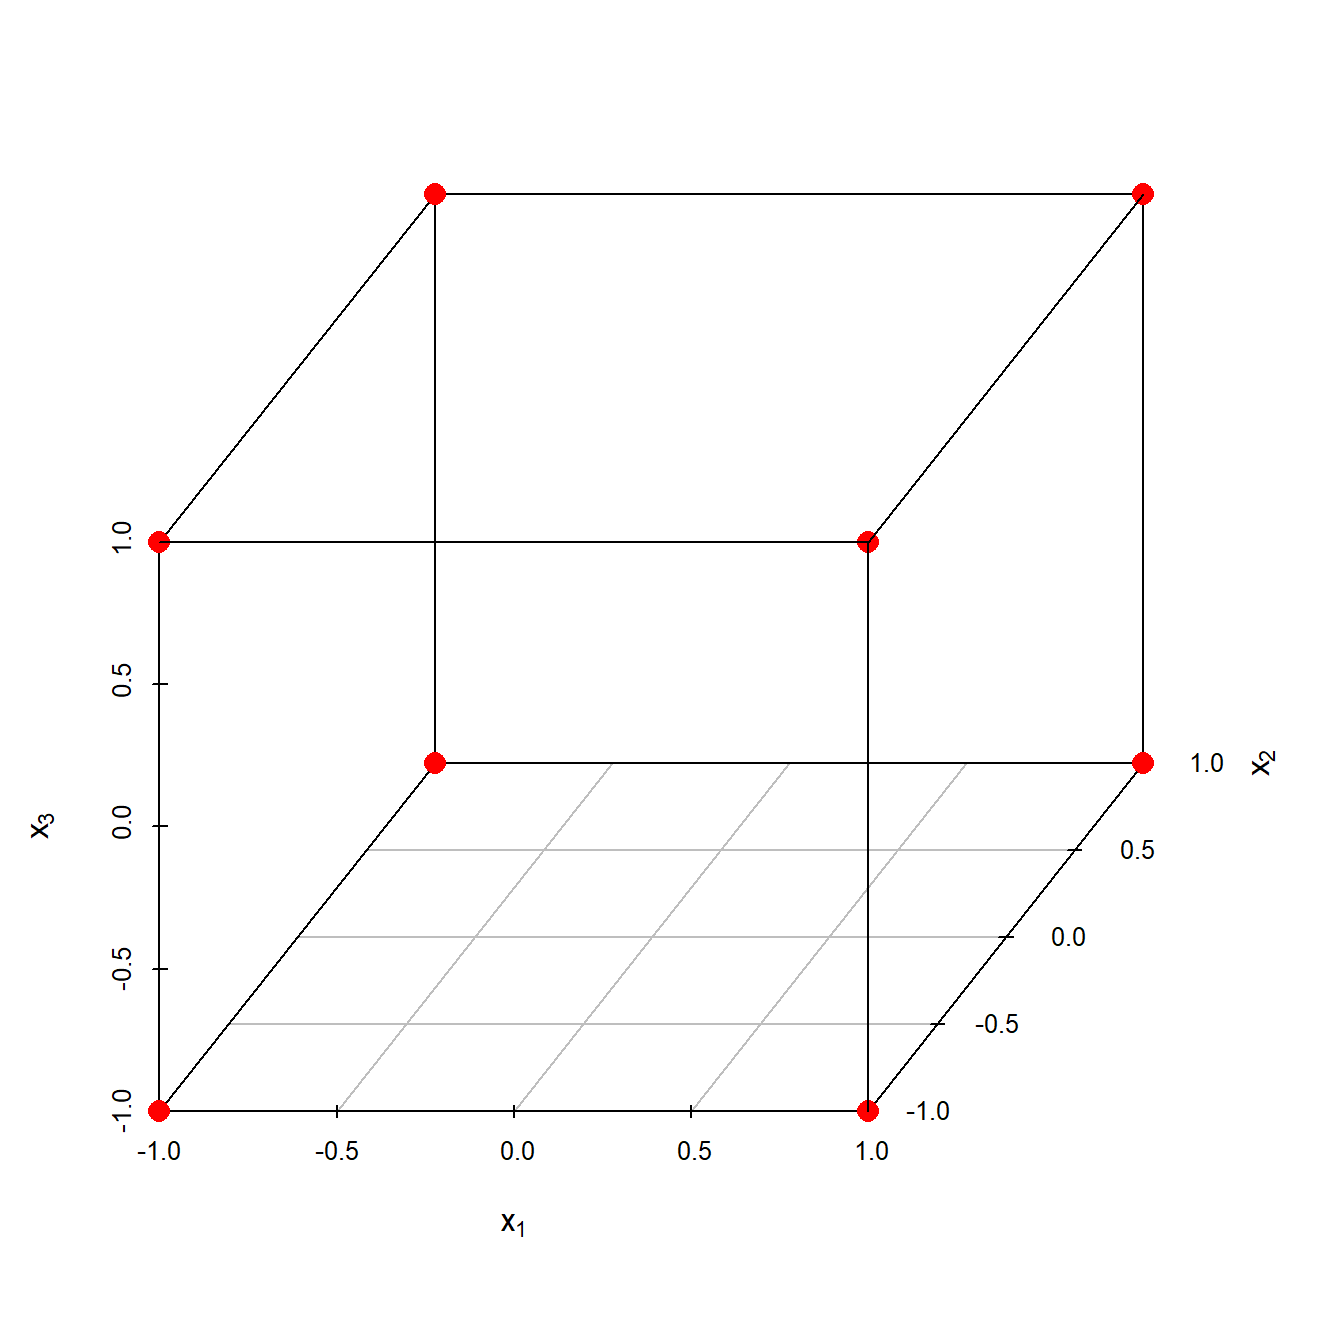 $2^3$ full factorial design with factorial points labelled red